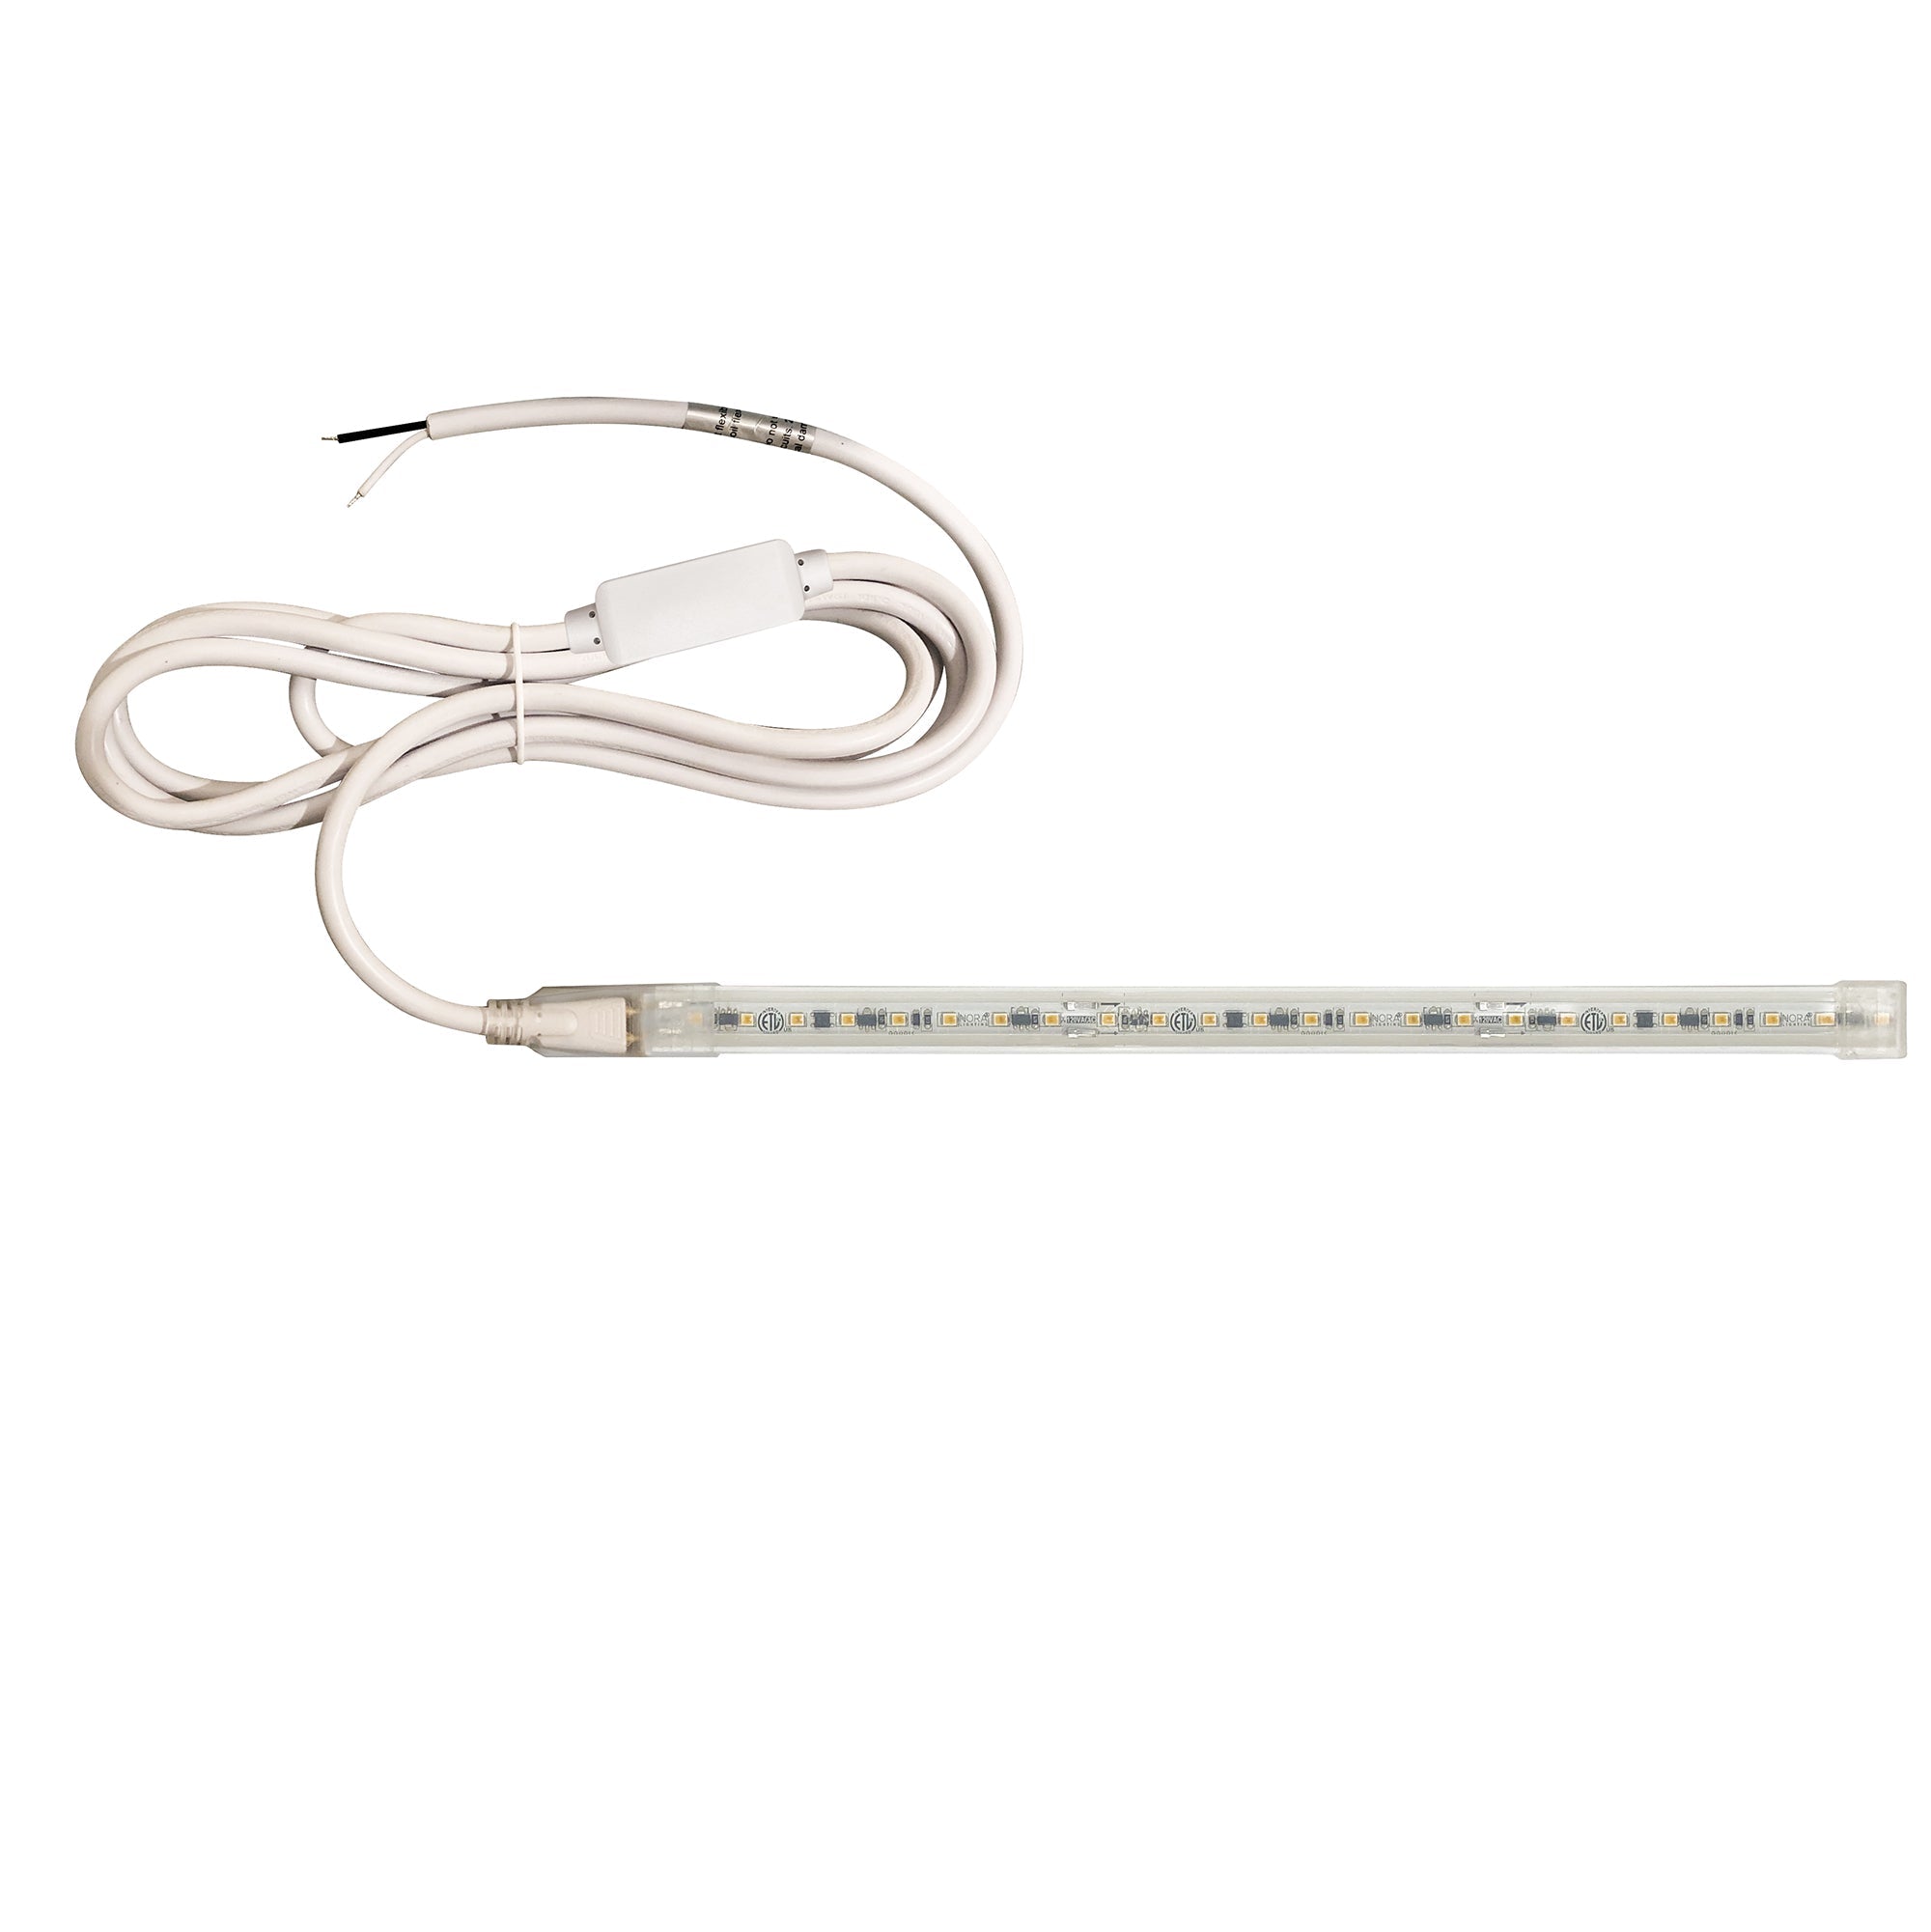 Nora Lighting NUTP13-W52-12-940/HWSP - Accent / Undercabinet - Custom Cut 52-ft 120V Continuous LED Tape Light, 330lm / 3.6W per foot, 4000K, w/ Mounting Clips and 8' Hardwired Power Cord w/ Surge Protector